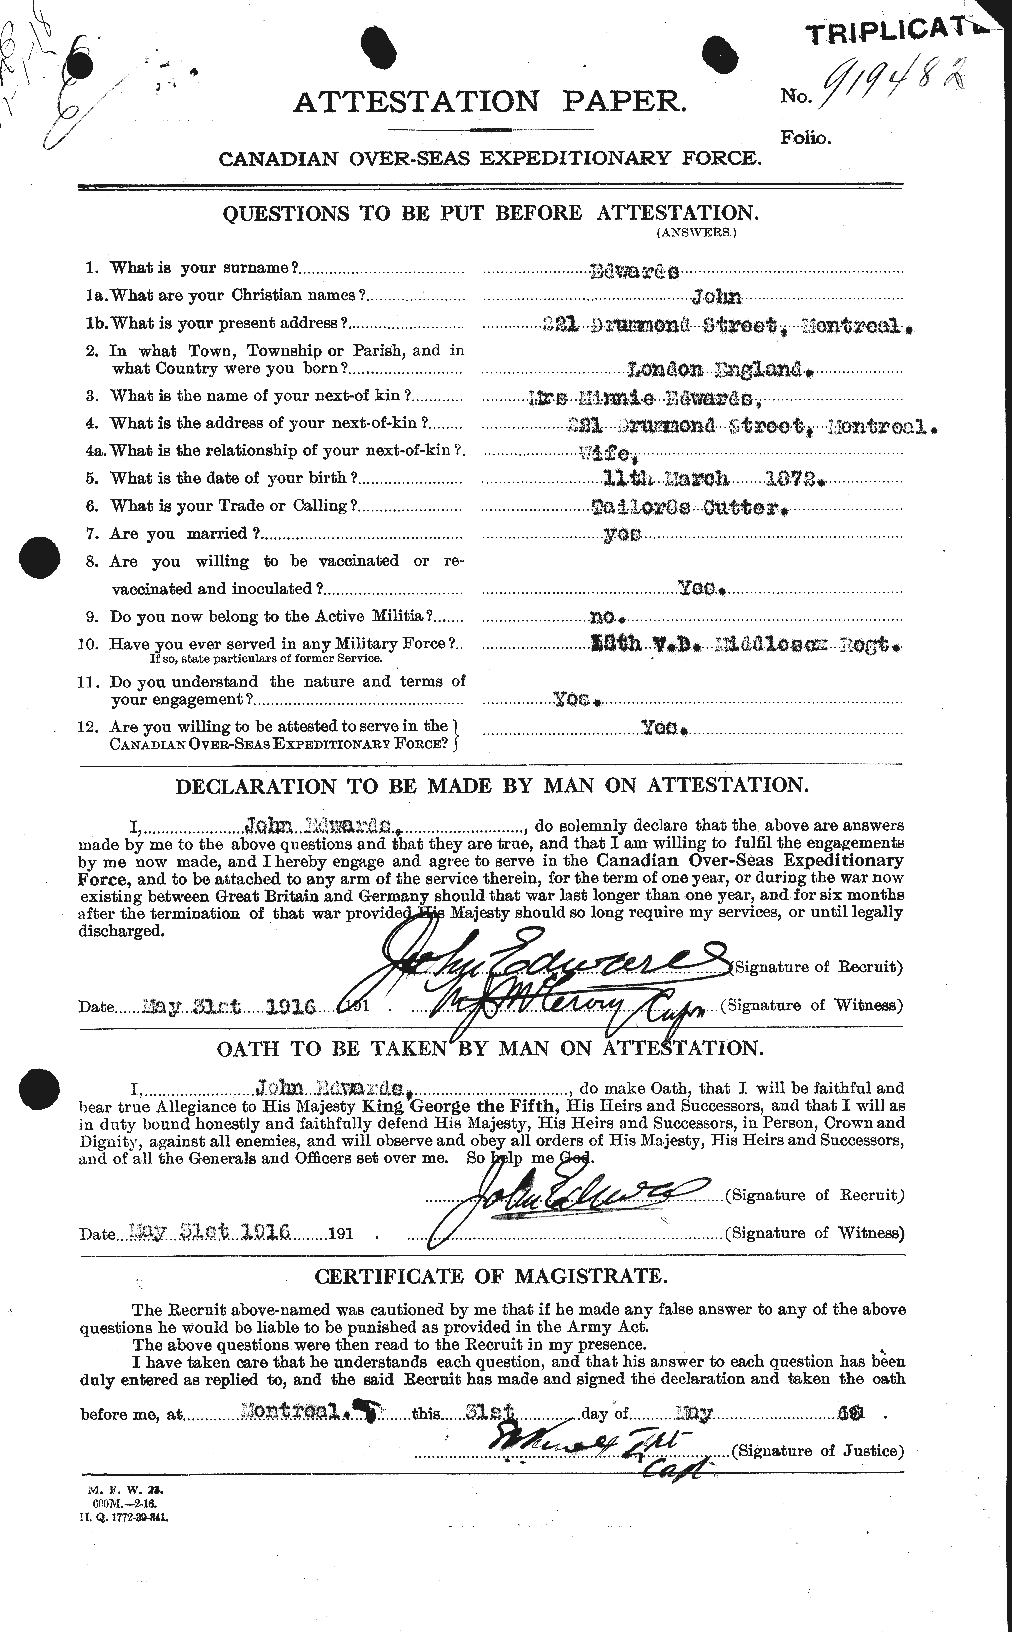 Personnel Records of the First World War - CEF 309834a